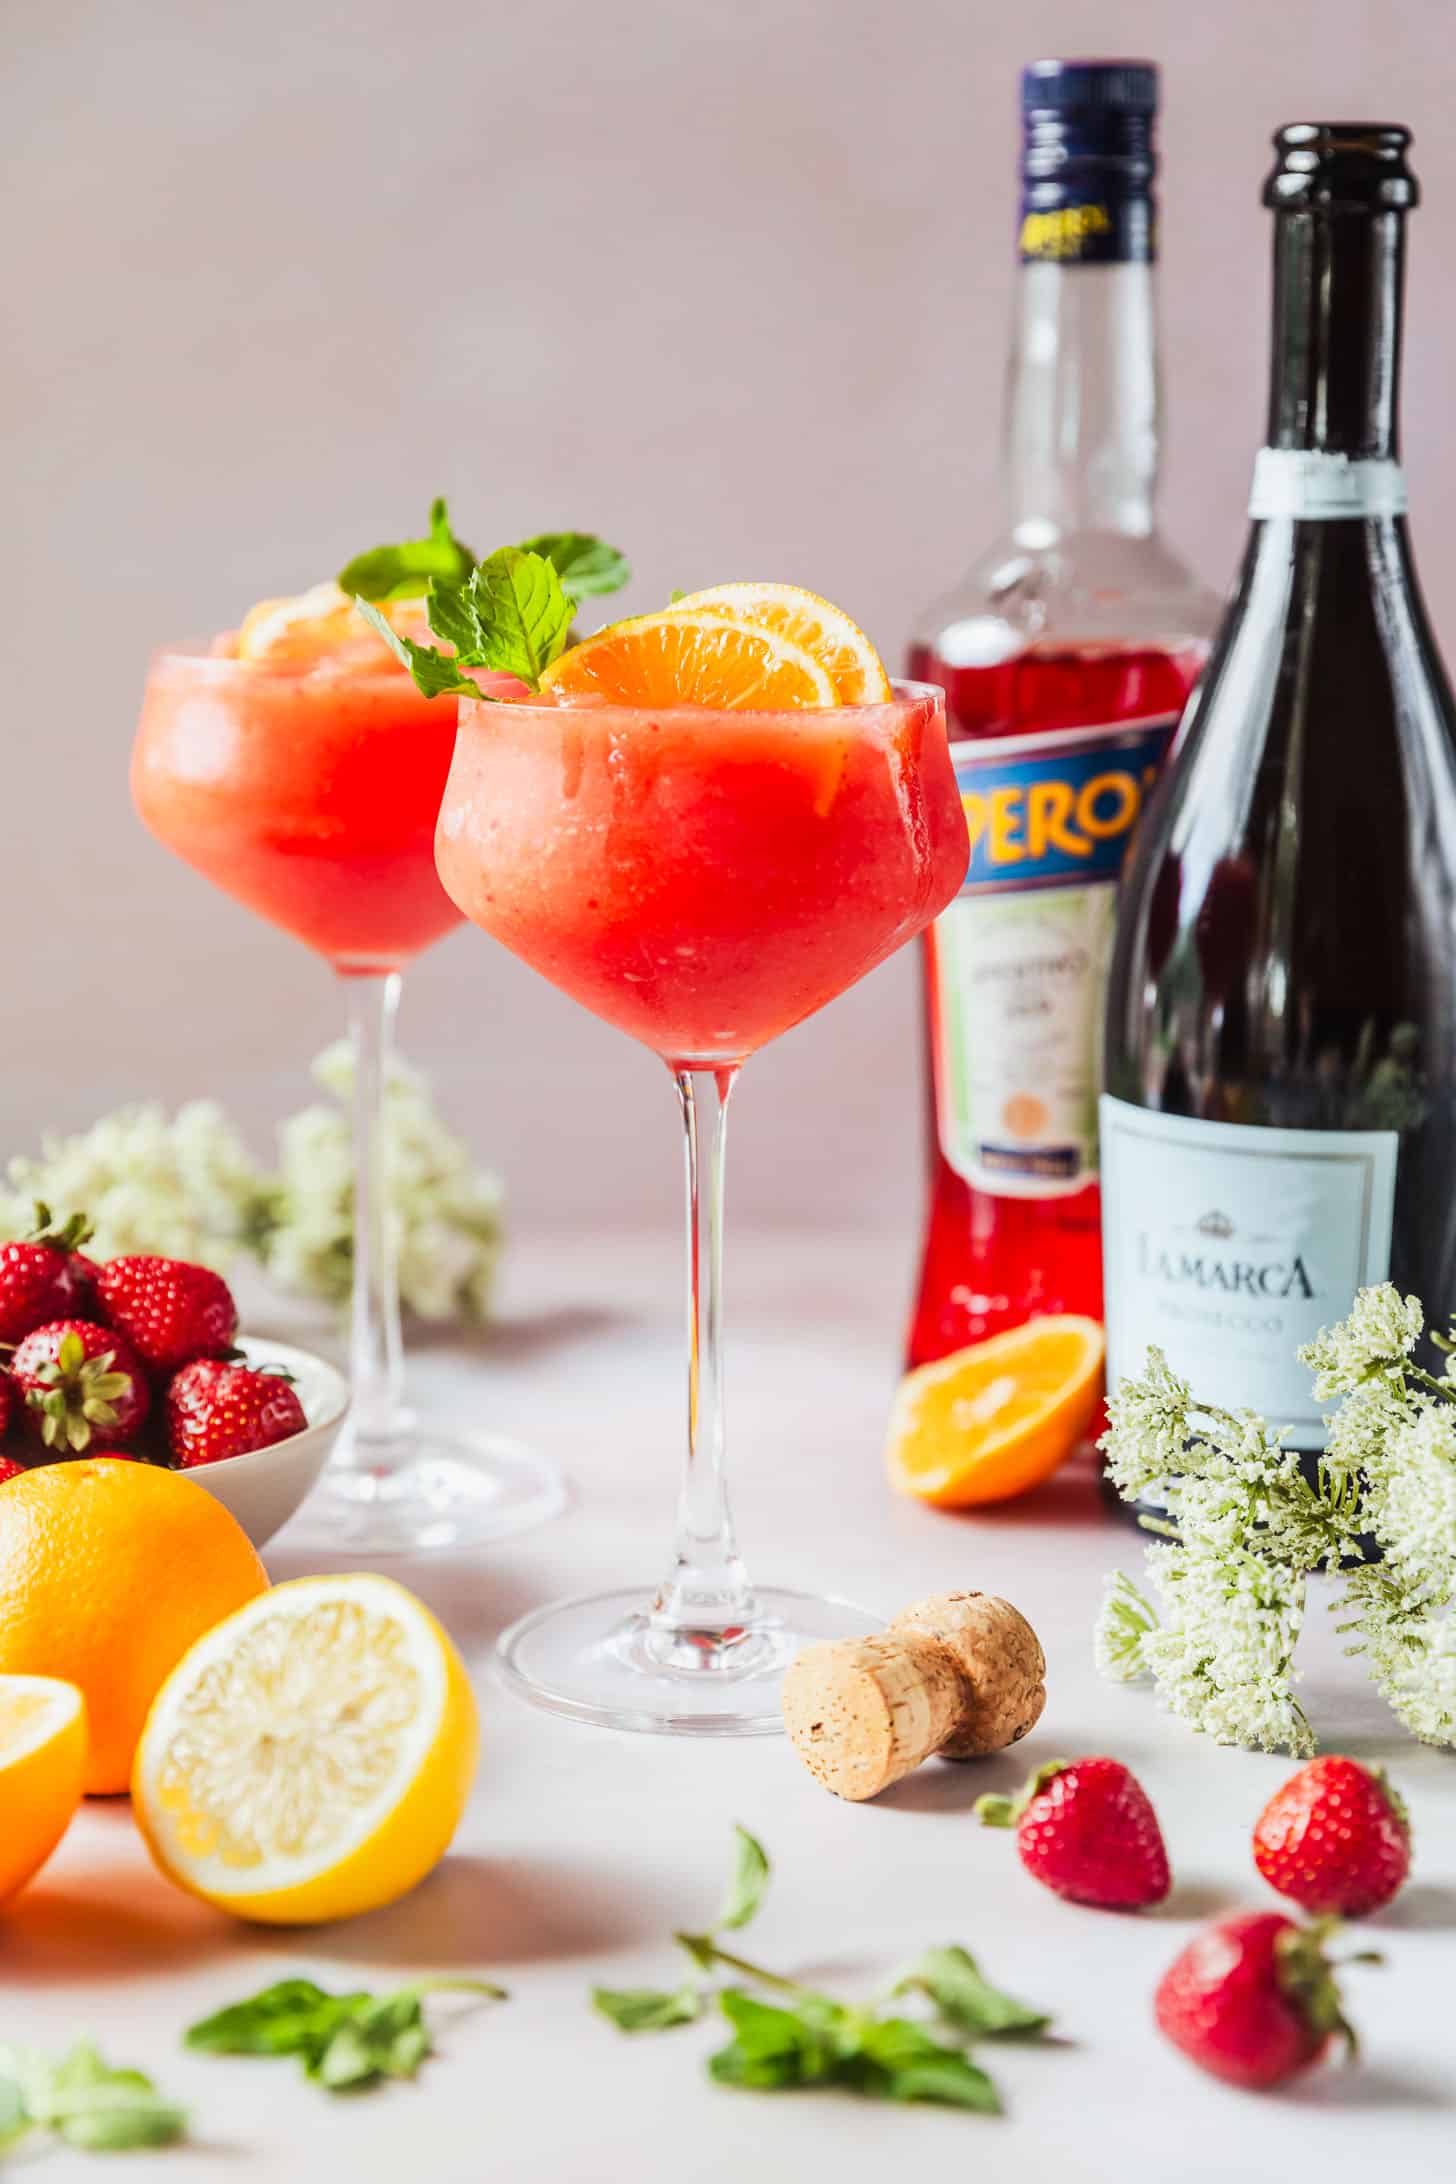 Two frozen Aperol spritz cocktails in coupe glasses on a pink background next to a white bowl of strawberries, lemons, oranges, white flowers, a bottle of Prosecco, and a bottle of Aperol.